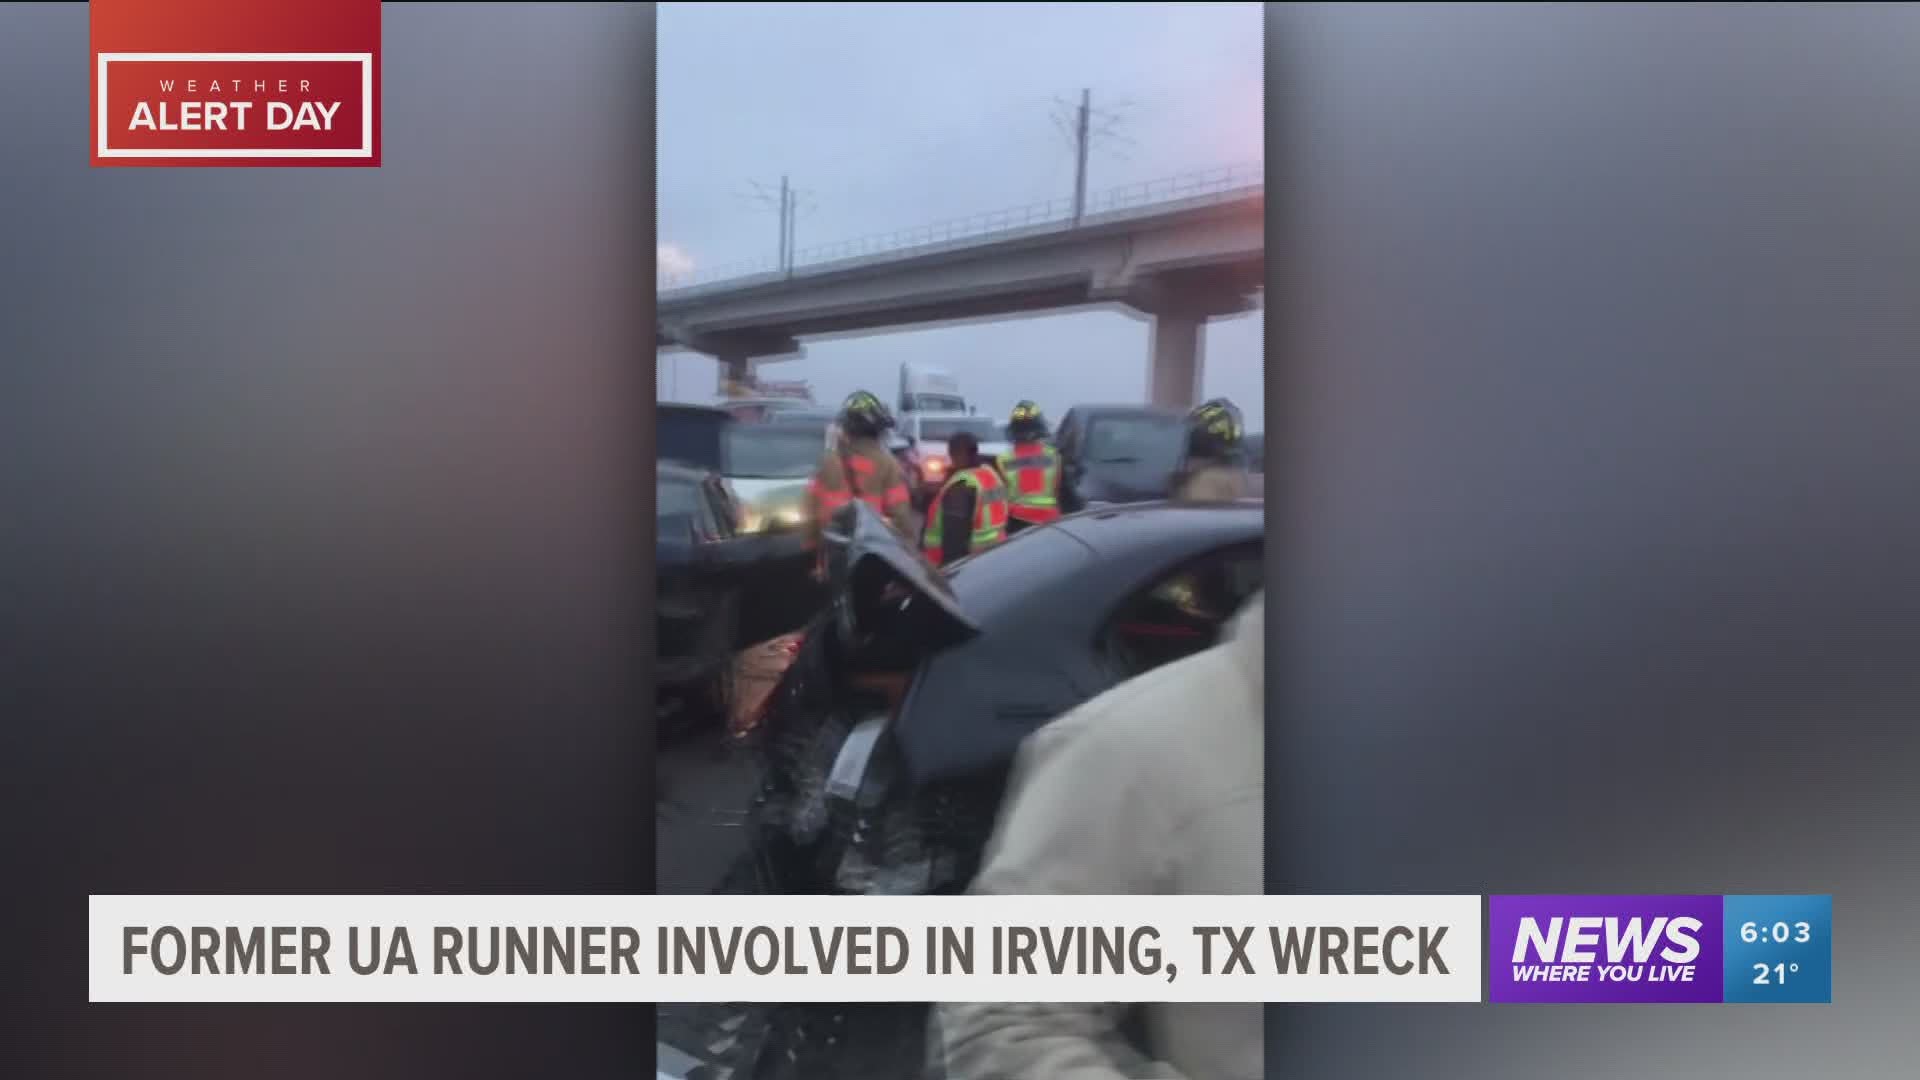 14 cars were involved in the accident on Highway 114 and two people were taken to the hospital with injuries. https://bit.ly/3rNnVnQ